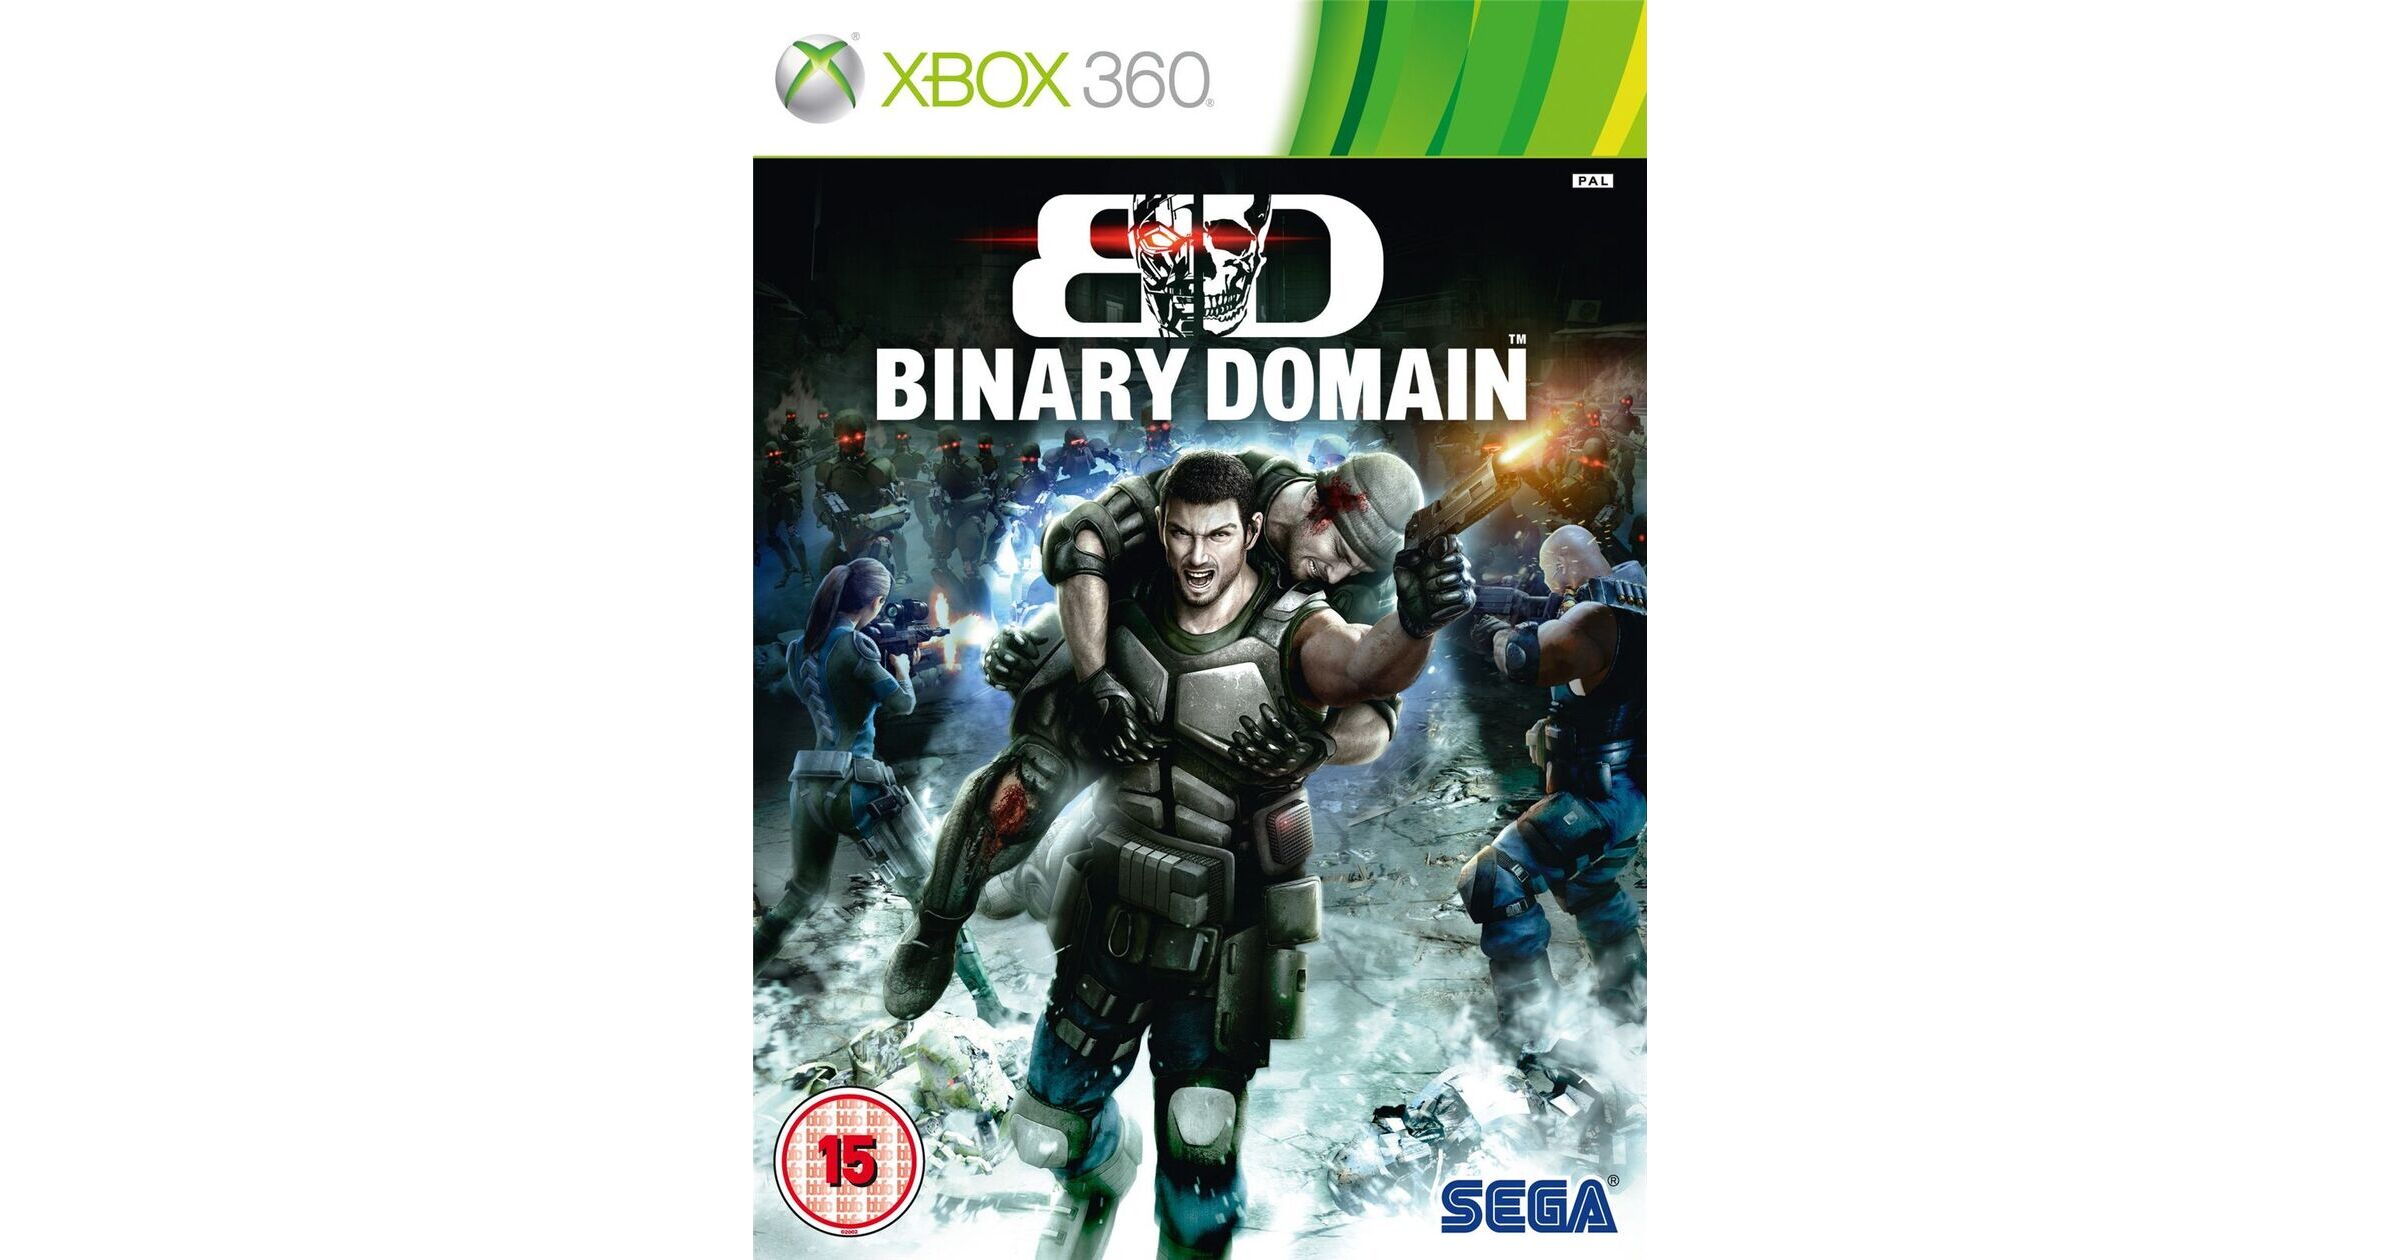 download xbox binary domain for free